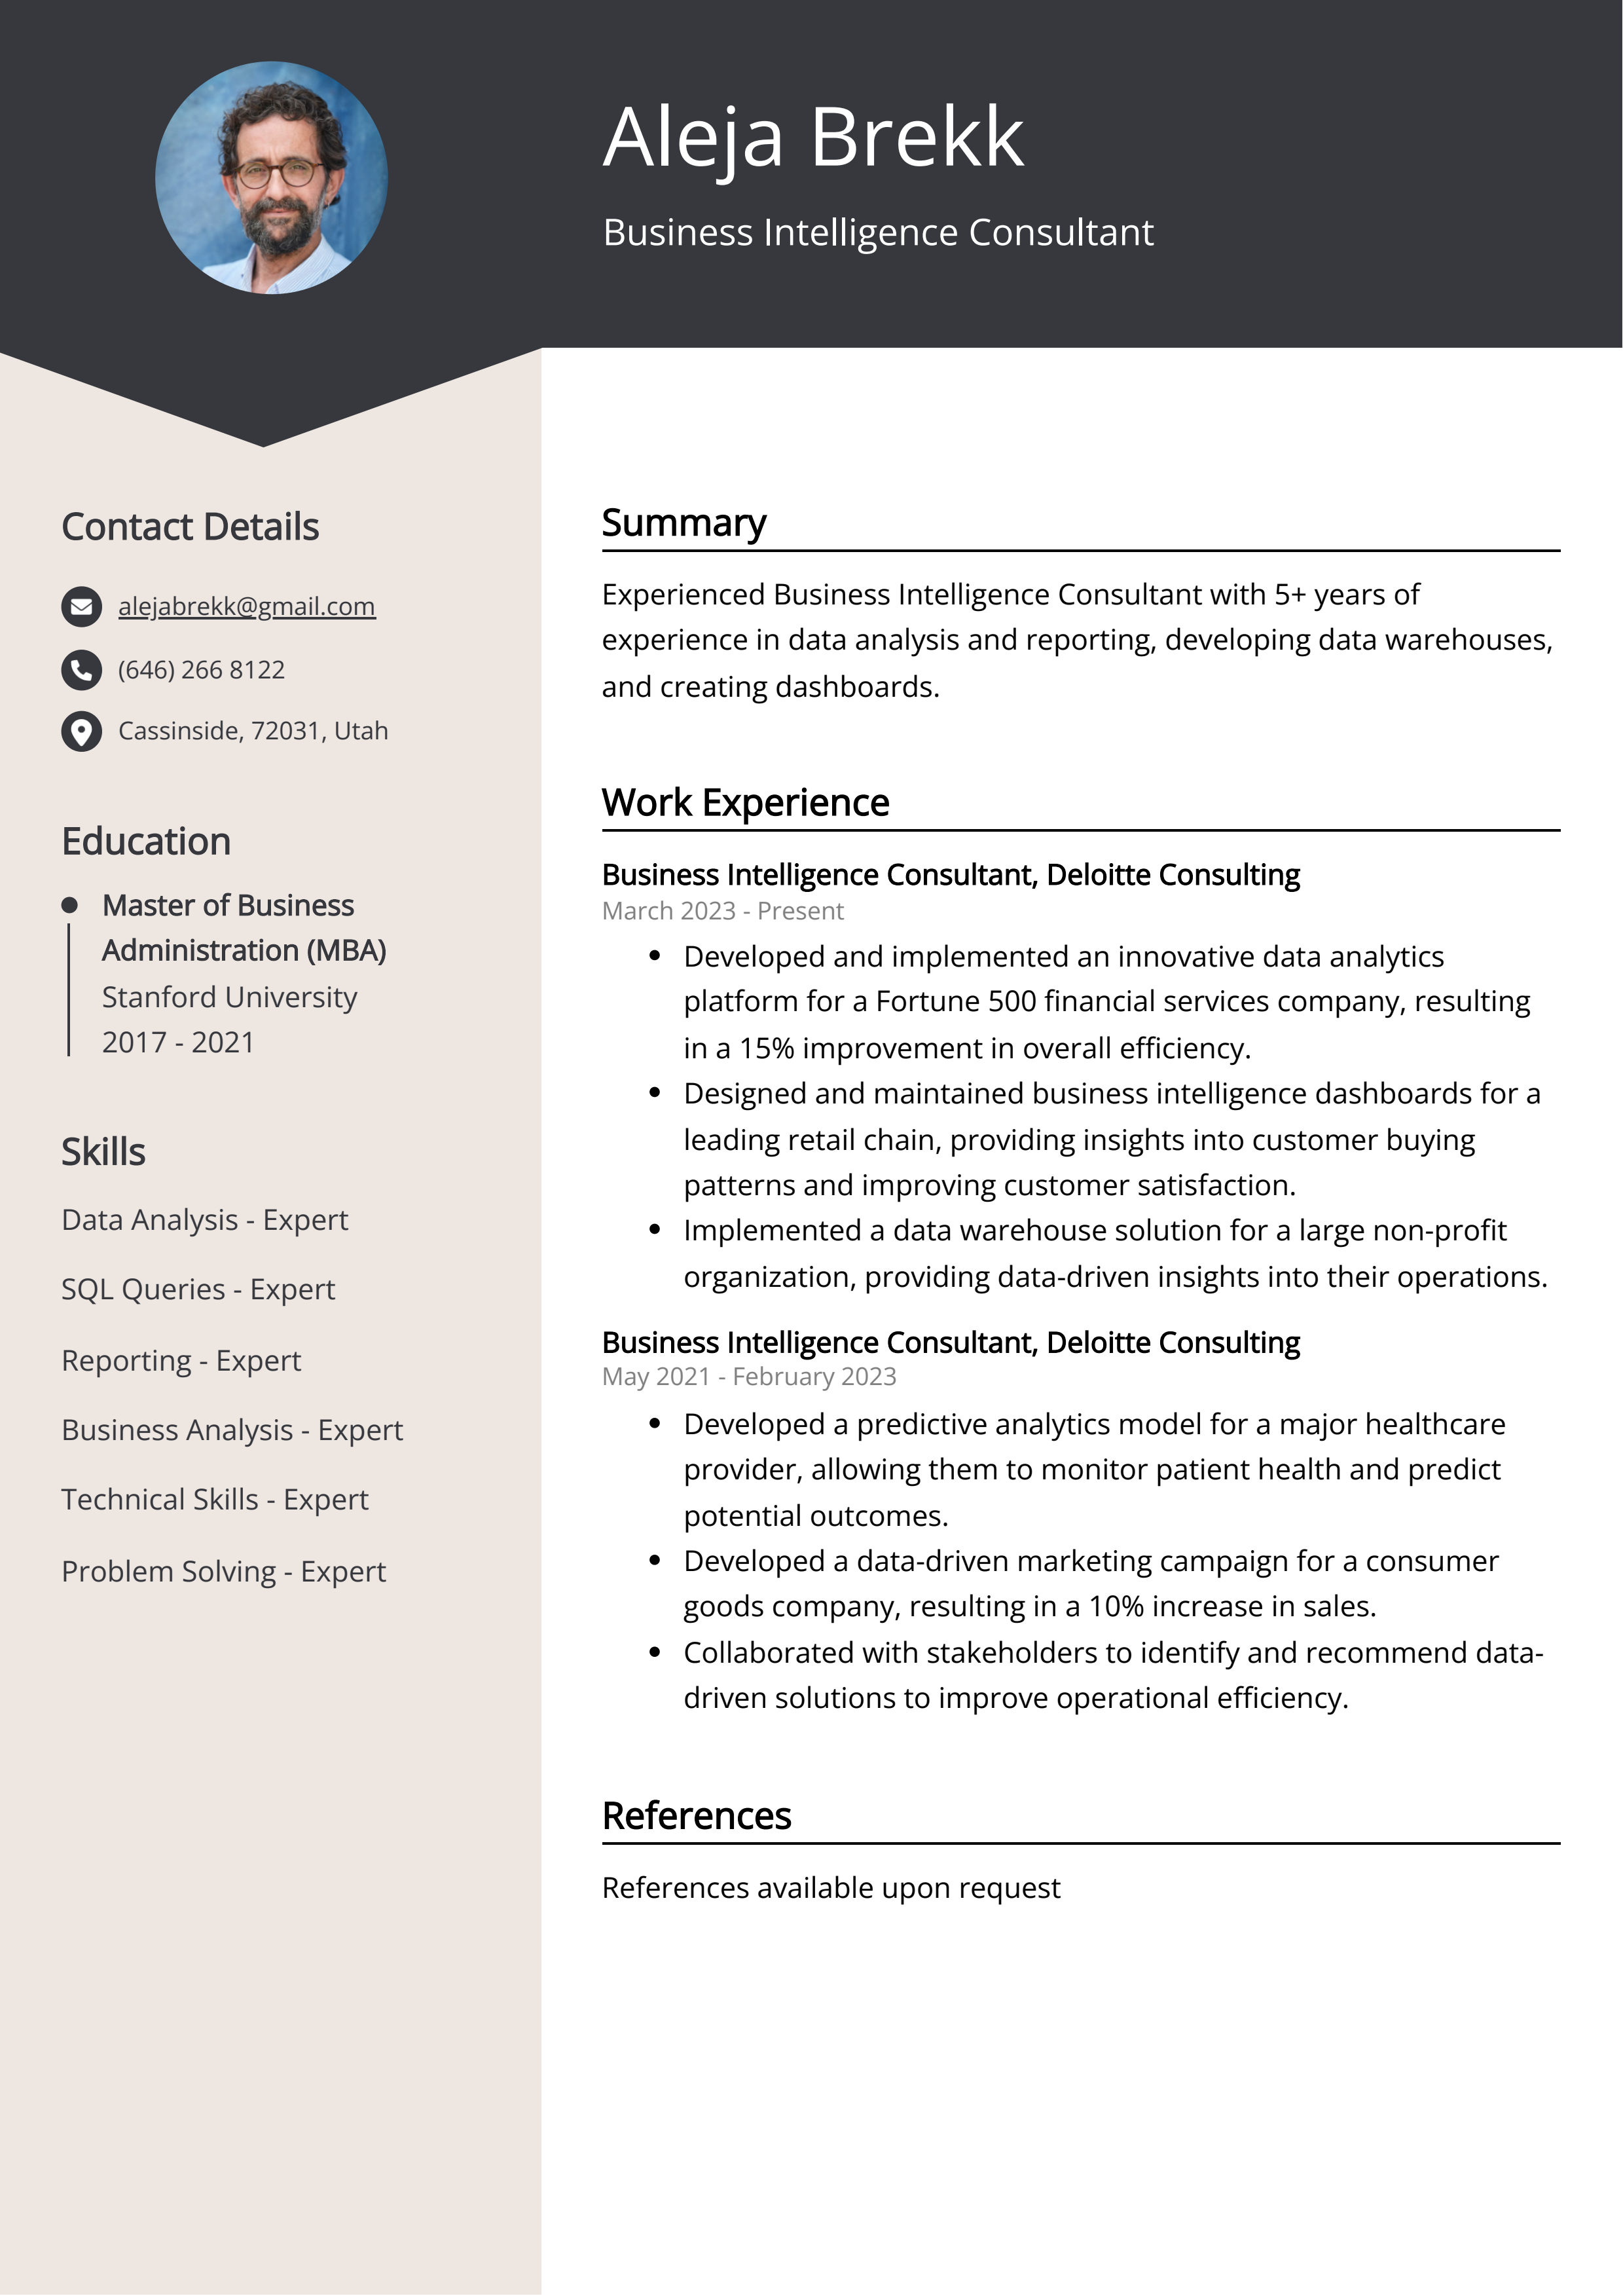 Business Intelligence Consultant CV Example